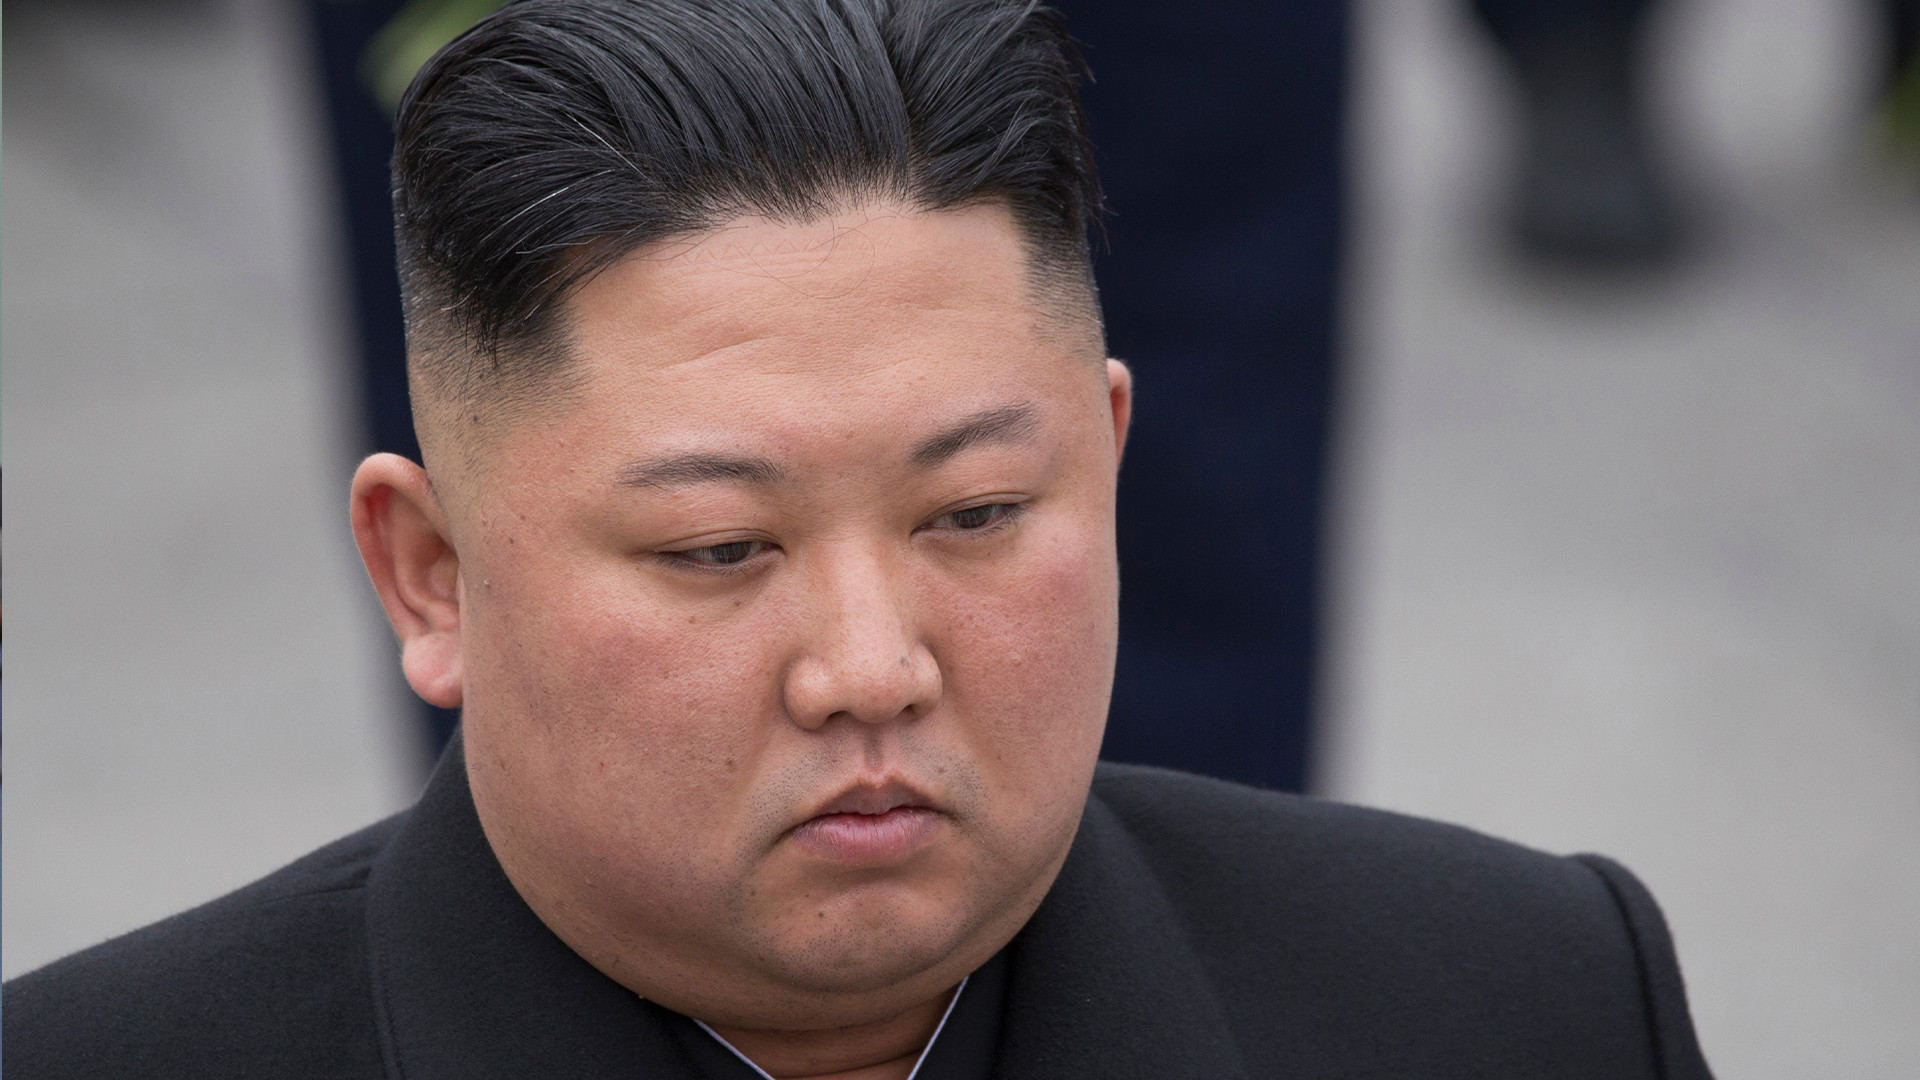 Kim Jong Un was in critical condition after surgery, U.S. official says